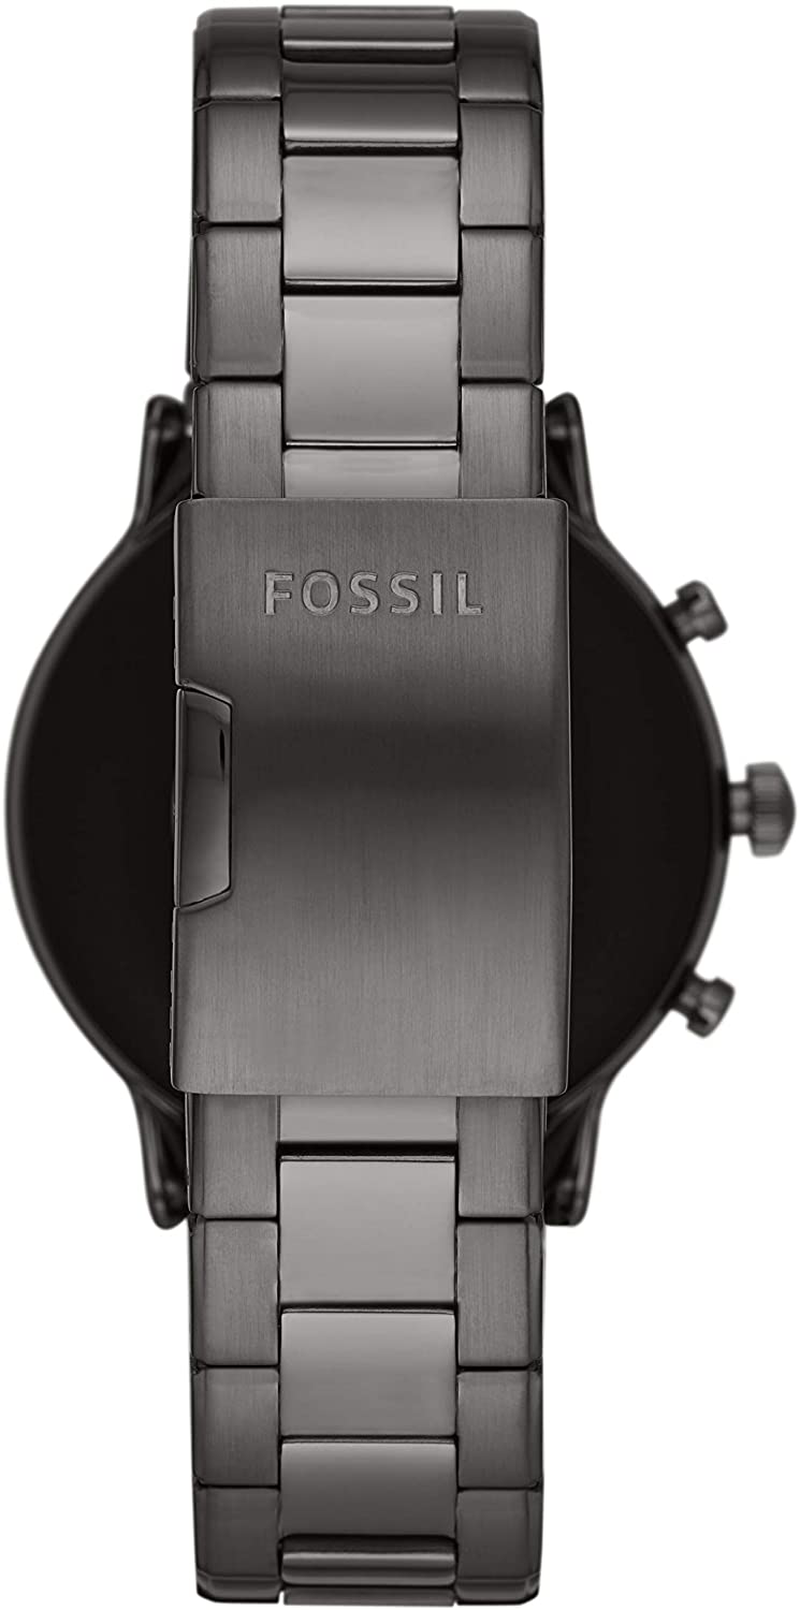 Fossil Carlyle Gen 5 Stainless Steel Touchscreen Smoke/Black Silicone Smartwatch